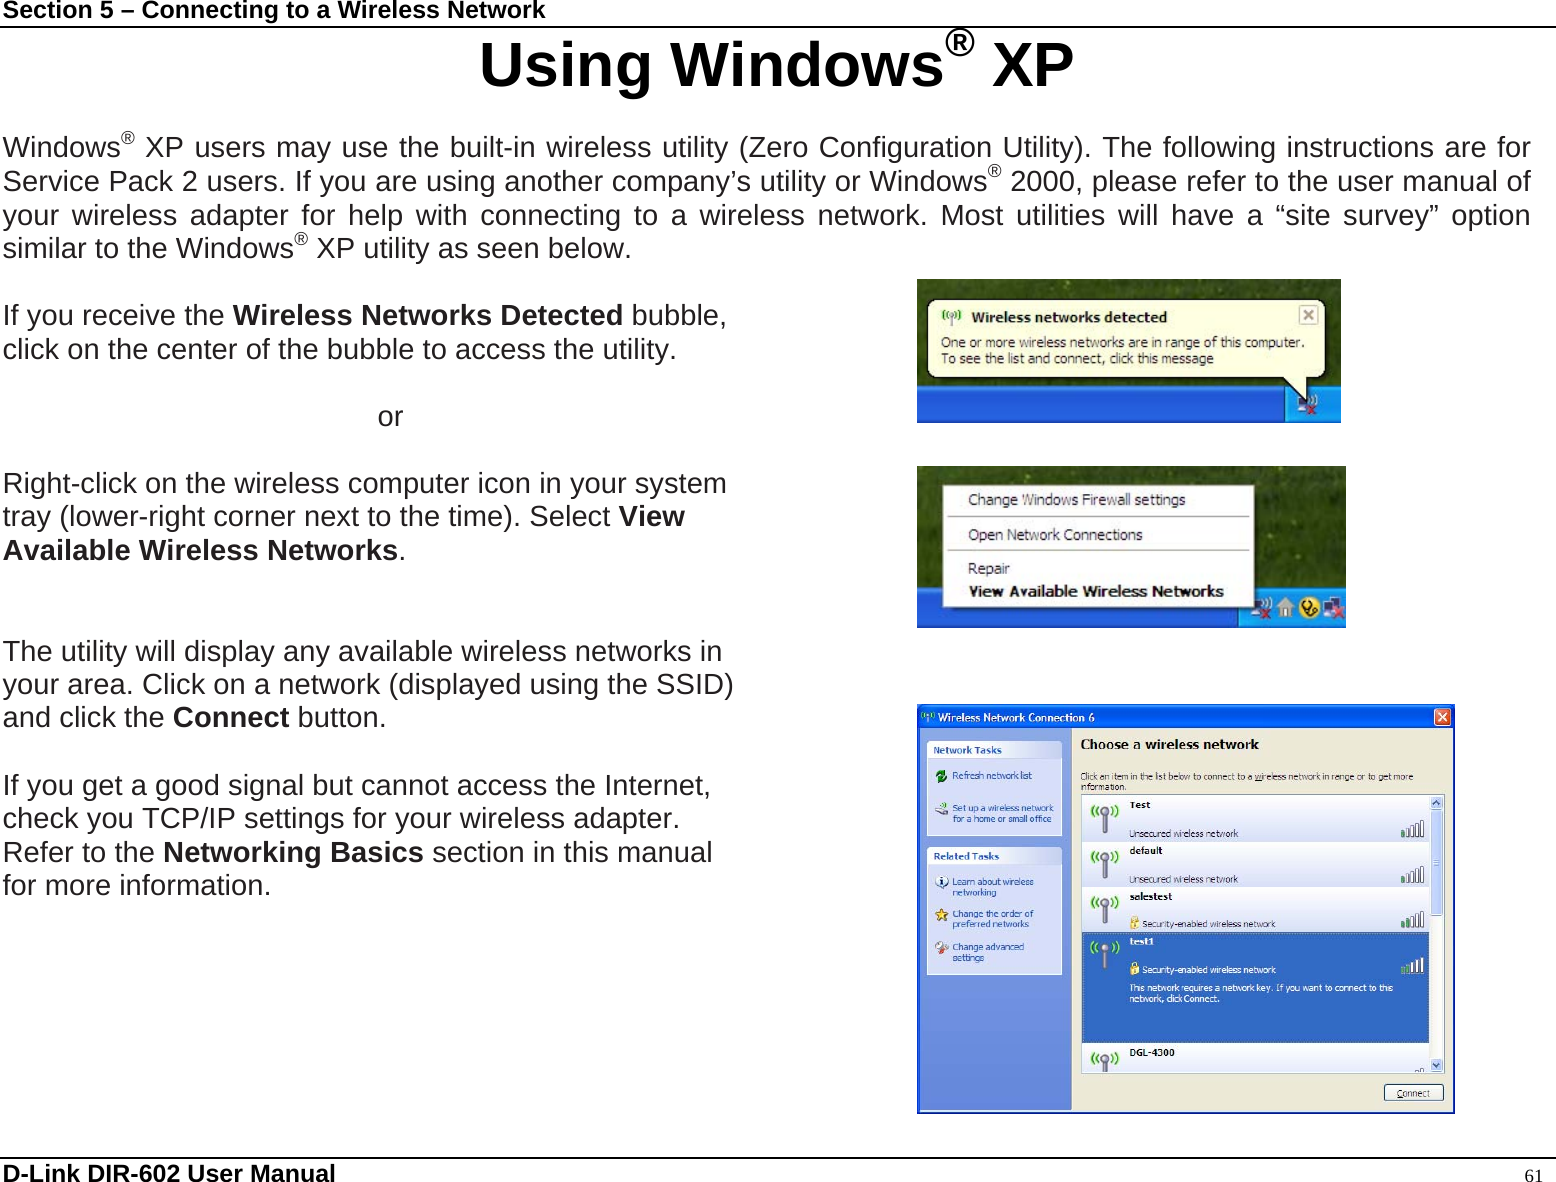 Section 5 – Connecting to a Wireless Network Using Windows® XP  Windows® XP users may use the built-in wireless utility (Zero Configuration Utility). The following instructions are for Service Pack 2 users. If you are using another company’s utility or Windows® 2000, please refer to the user manual of your wireless adapter for help with connecting to a wireless network. Most utilities will have a “site survey” option similar to the Windows® XP utility as seen below.  If you receive the Wireless Networks Detected bubble,  click on the center of the bubble to access the utility.       or  Right-click on the wireless computer icon in your system tray (lower-right corner next to the time). Select View  Available Wireless Networks.   The utility will display any available wireless networks in   your area. Click on a network (displayed using the SSID)   and click the Connect button.  If you get a good signal but cannot access the Internet,   check you TCP/IP settings for your wireless adapter.   Refer to the Networking Basics section in this manual for more information.     D-Link DIR-602 User Manual                                                                                               61 